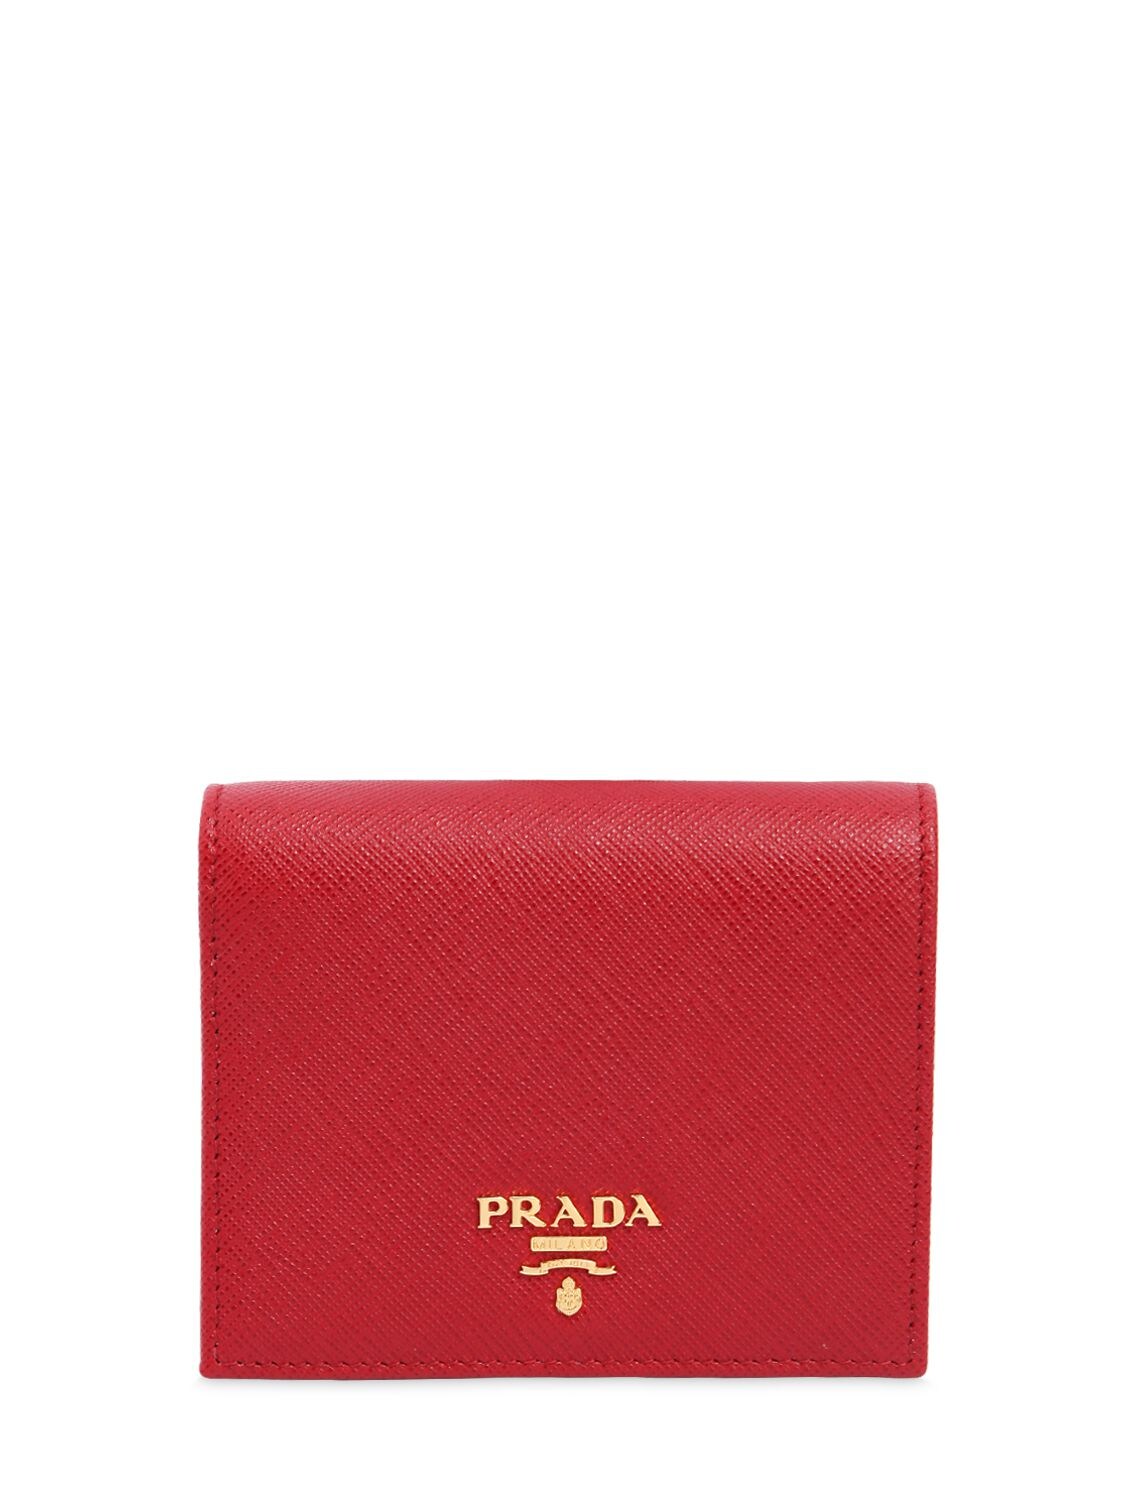 Prada Small Saffiano Leather Snap Wallet In 红色